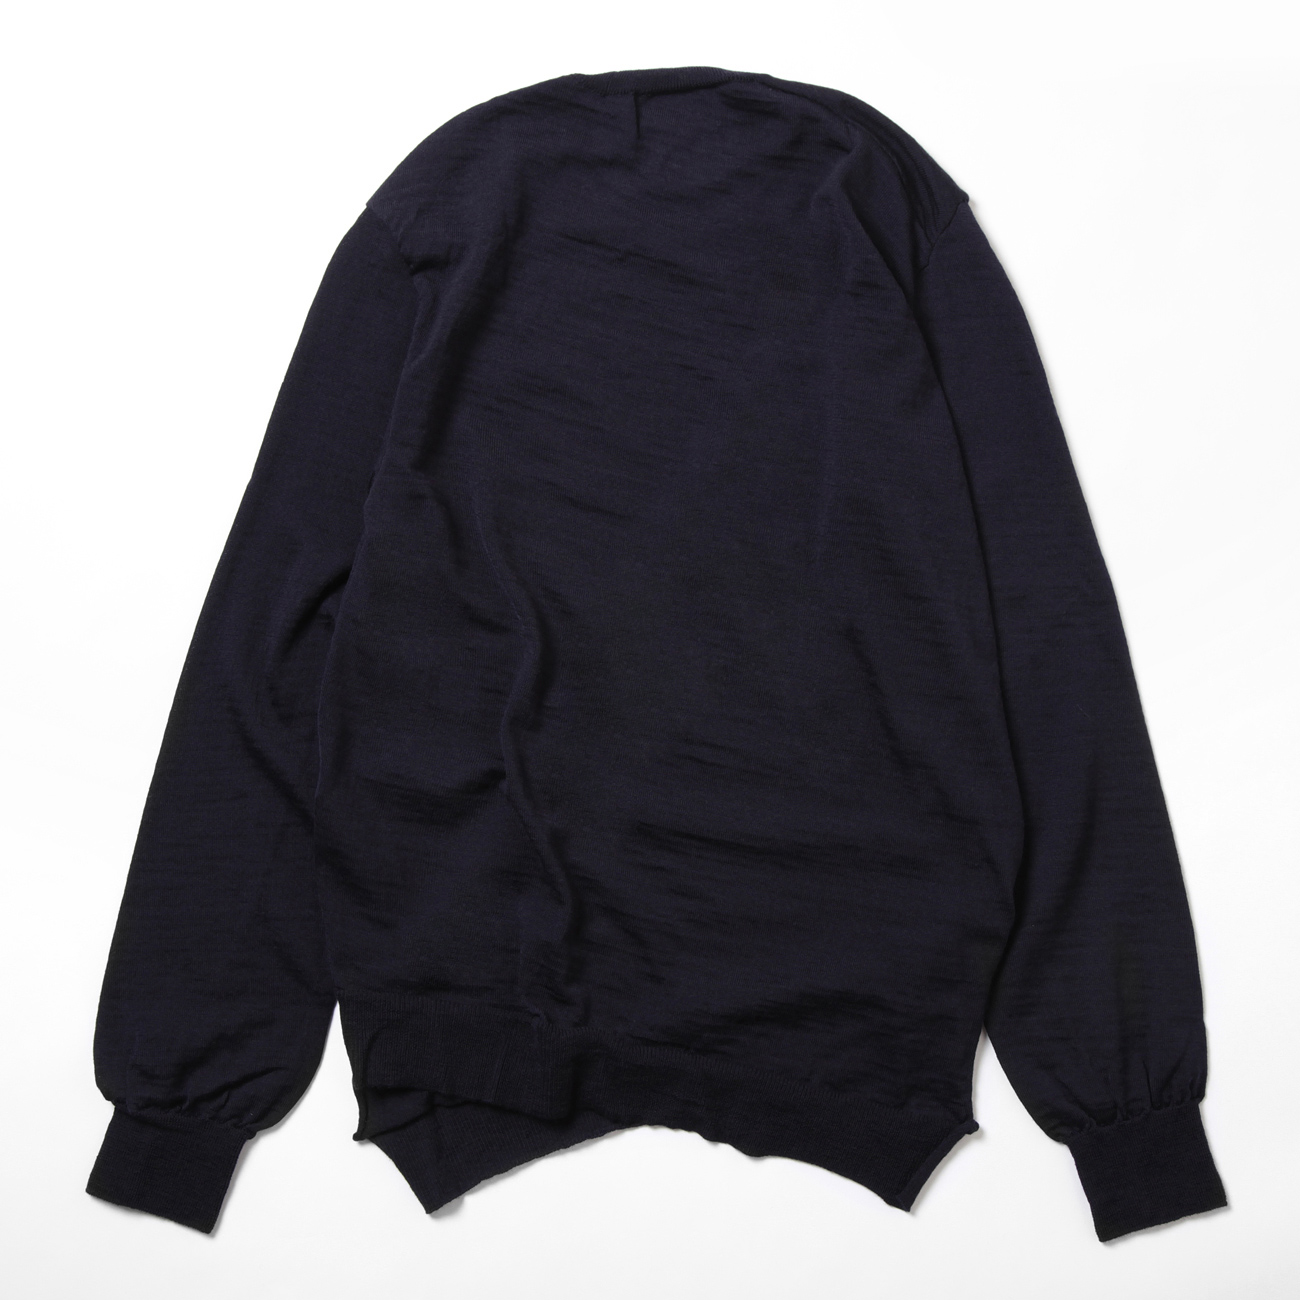 fully fashioned knit LACOSTE badge gauge 14 - Navy